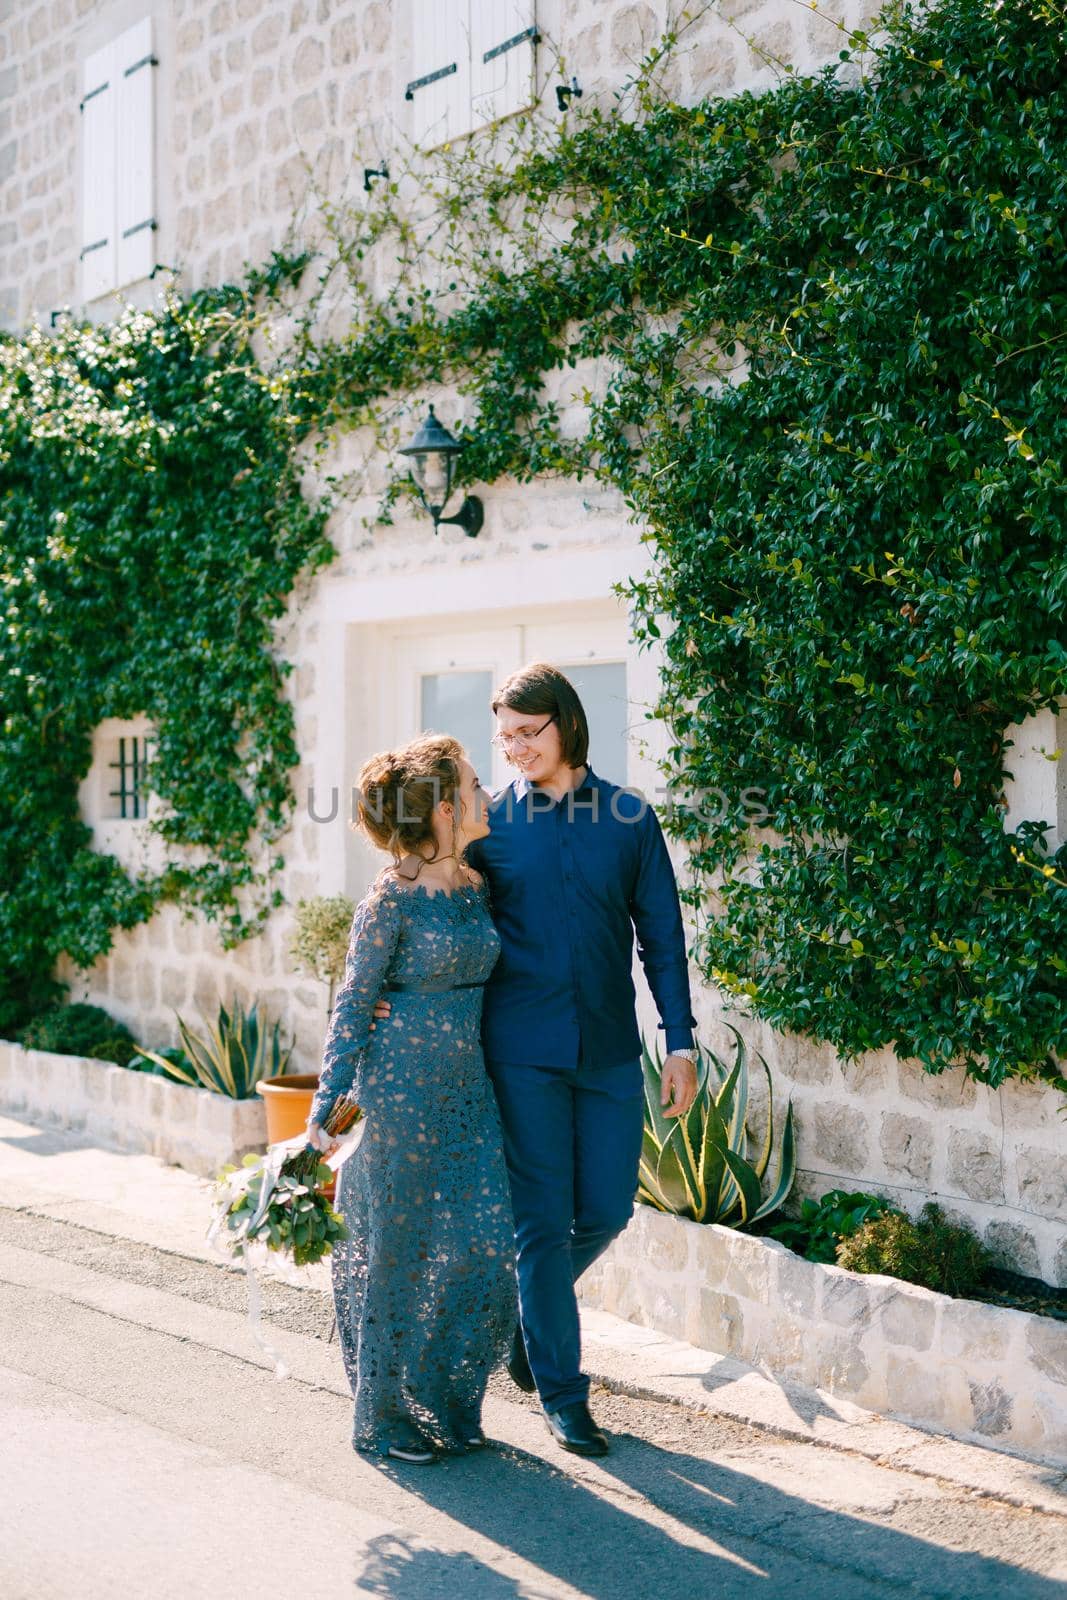 The bride and groom are embracing along the road near an old building with a white door, the wall is entwined with a green liana by Nadtochiy